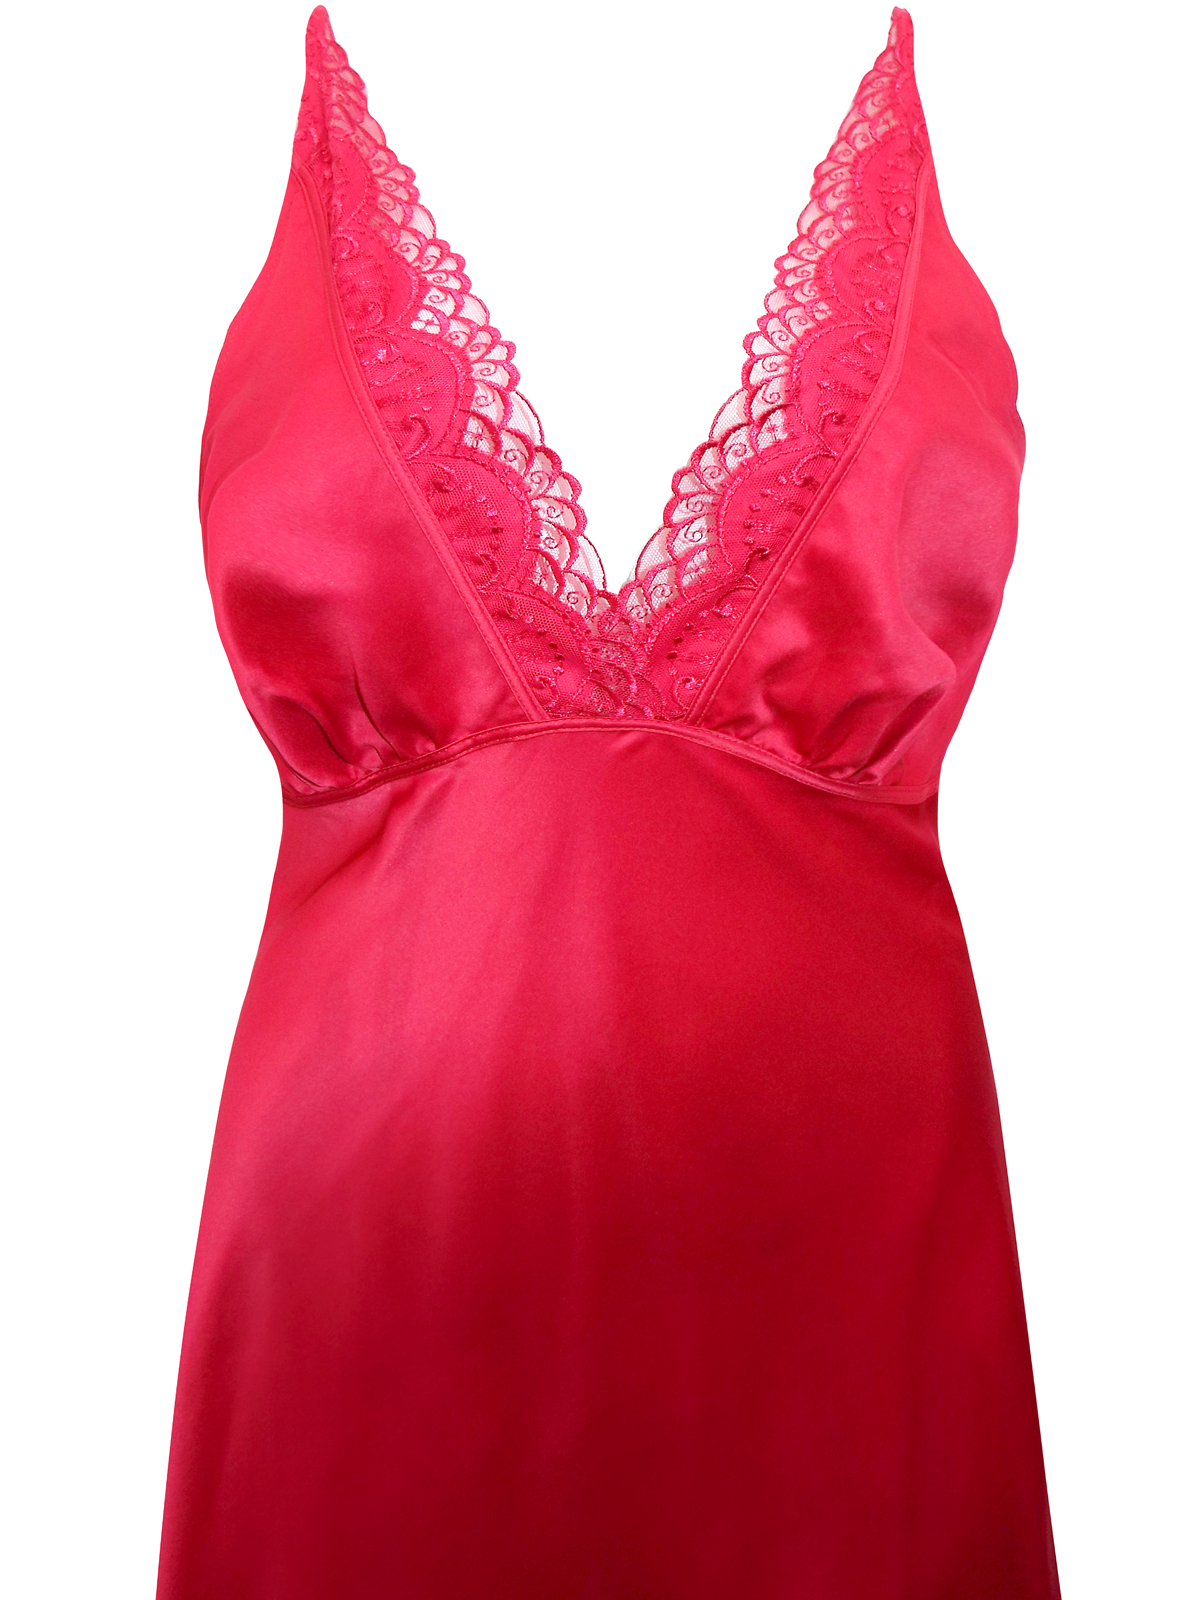 Marks and Spencer - - M&5 RED Long Satin Nightdress - Size 8 to 22